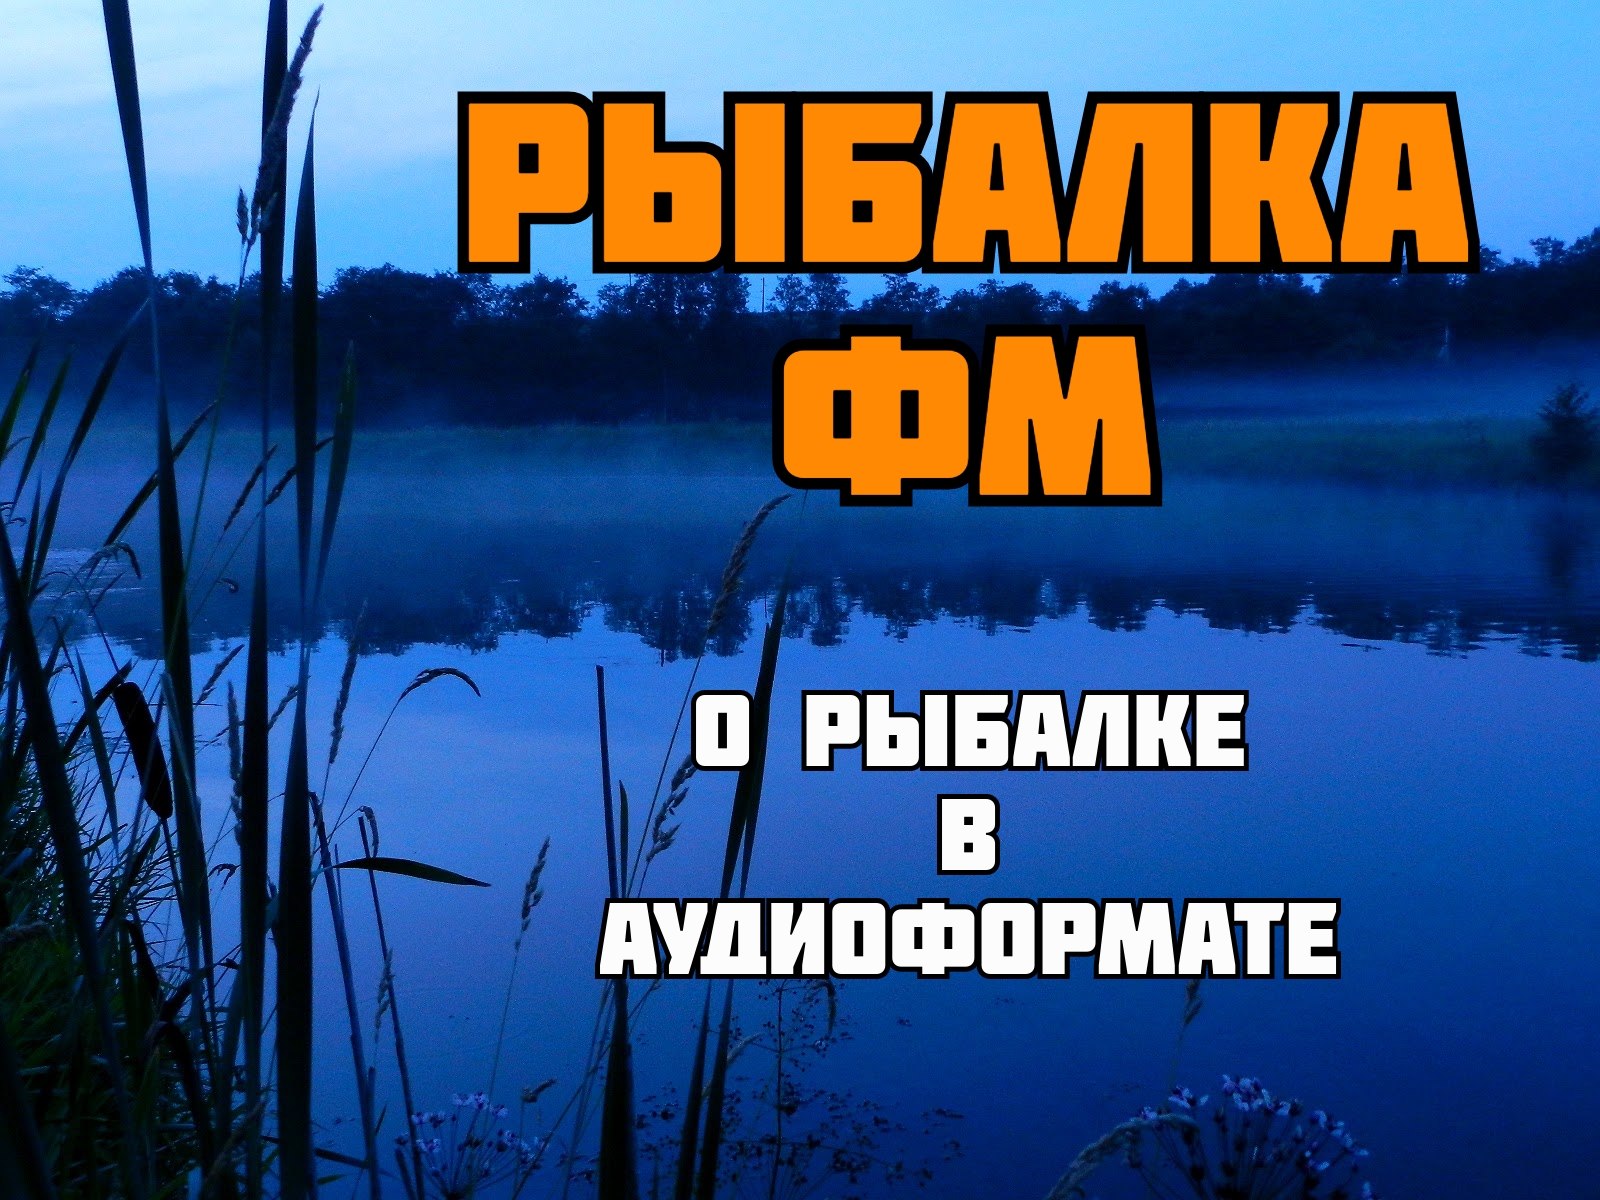 Fishing-FM-for-Russians-in-America